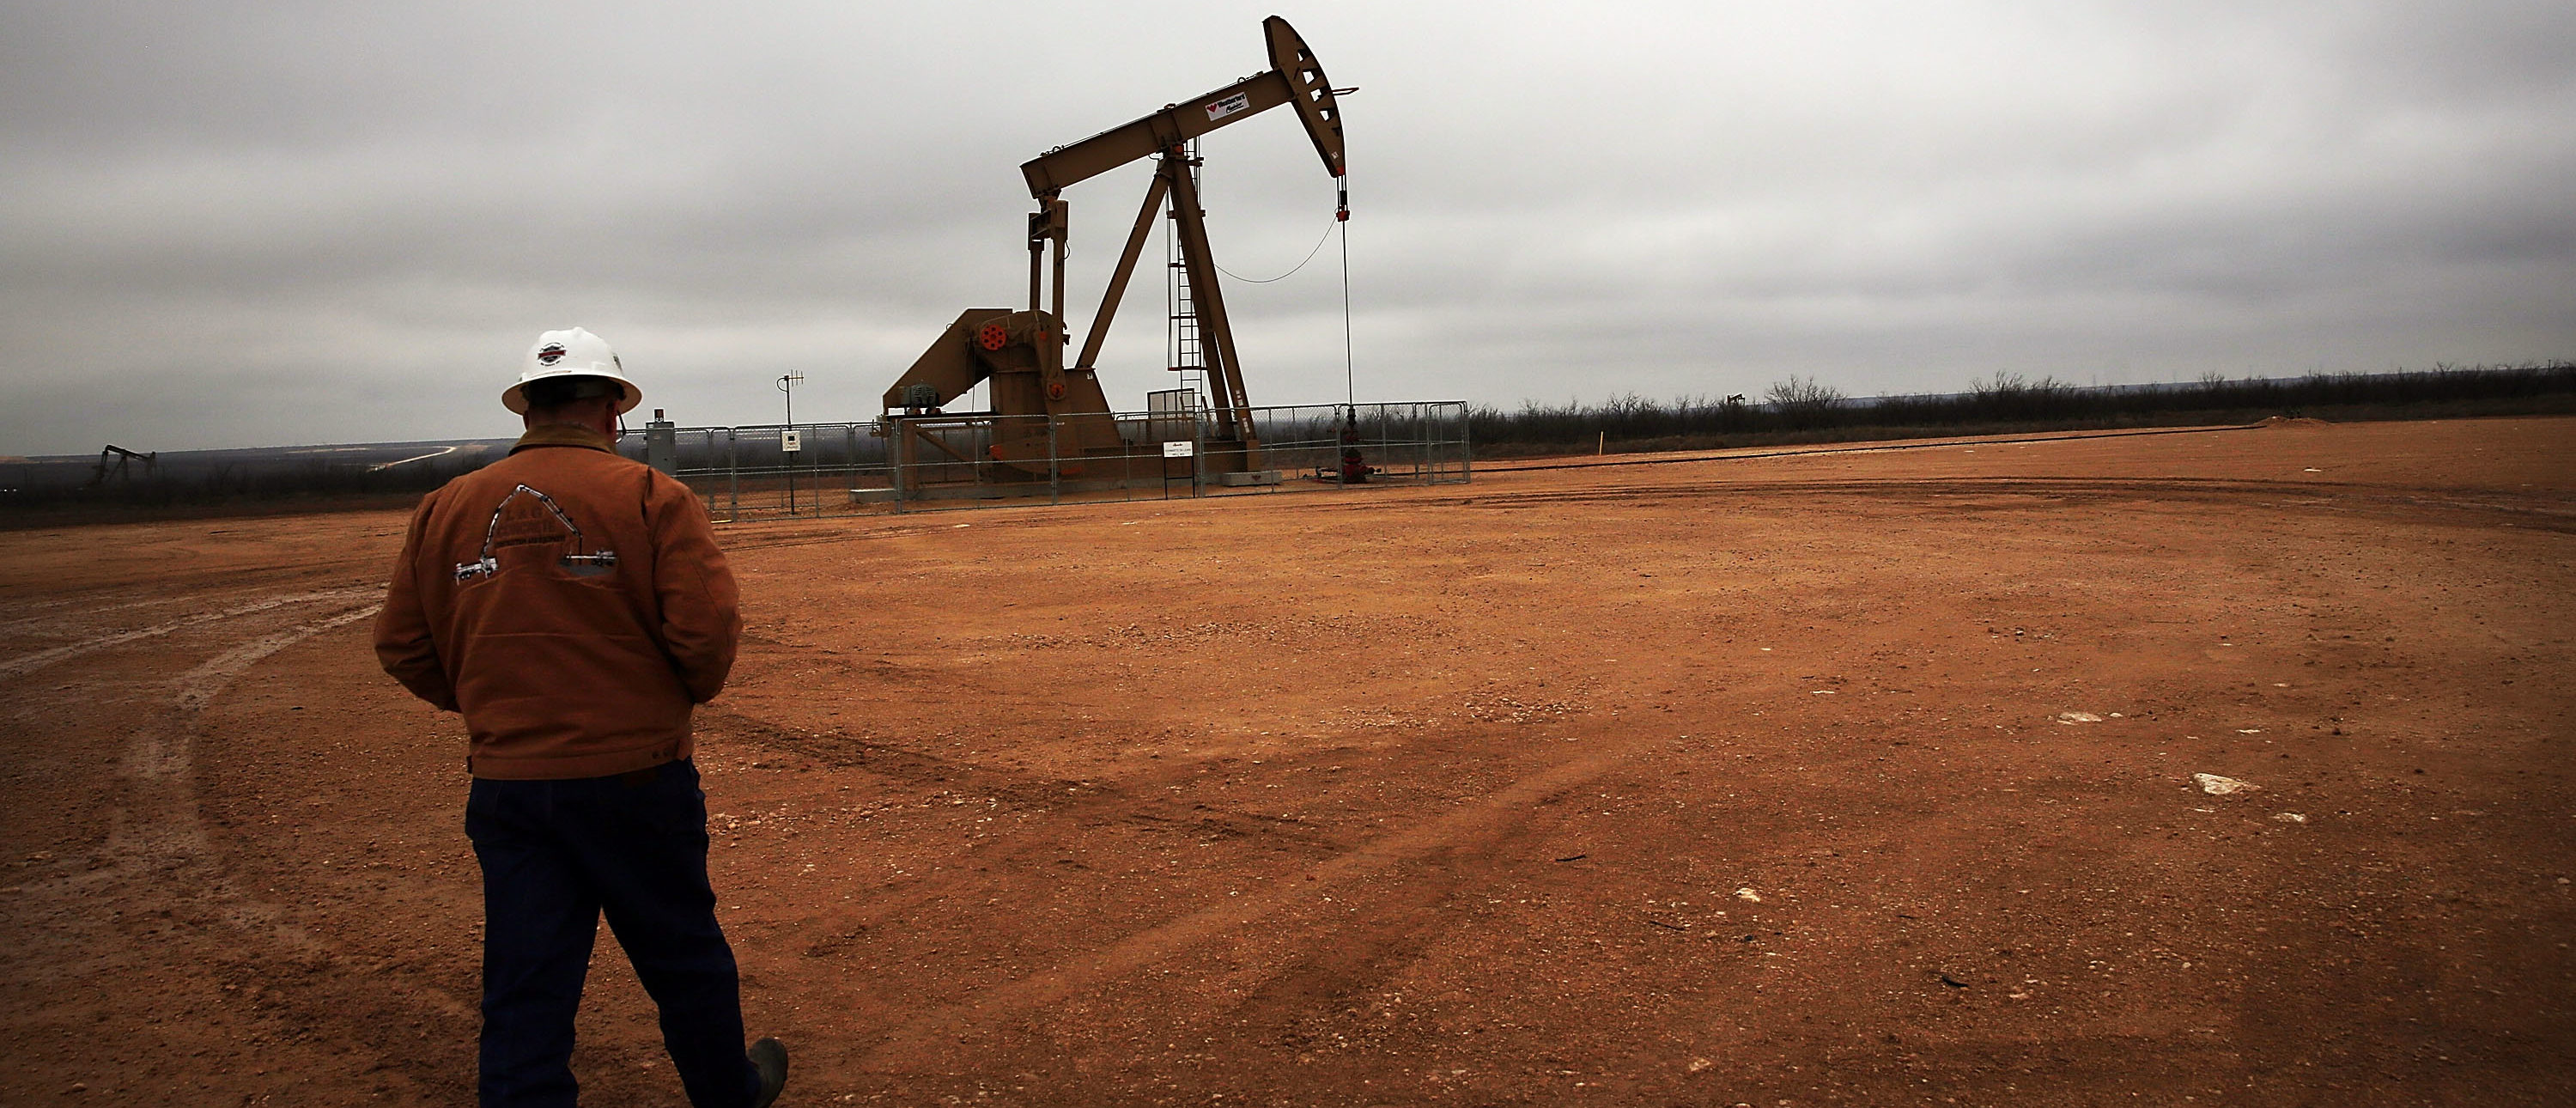 GARDEN CITY, TX - FEBRUARY 05: An oil well owned an operated by Apache Corporation in the Permian Basin are viewed on February 5, 2015 in Garden City, Texas. The well produces about 55-70 barrels of oil per day. As crude oil prices have fallen nearly 60 percent globally, many American communities that became dependent on oil revenue are preparing for hard times. Texas, which benefited from hydraulic fracturing and the shale drilling revolution, tripled its production of oil in the last five years. The Texan economy saw hundreds of billions of dollars come into the state before the global plunge in prices. Across the state drilling budgets are being slashed and companies are notifying workers of upcoming layoffs. According to federal labor statistics, around 300,000 people work in the Texas oil and gas industry, 50 percent more than four years ago. (Photo by Spencer Platt/Getty Images)